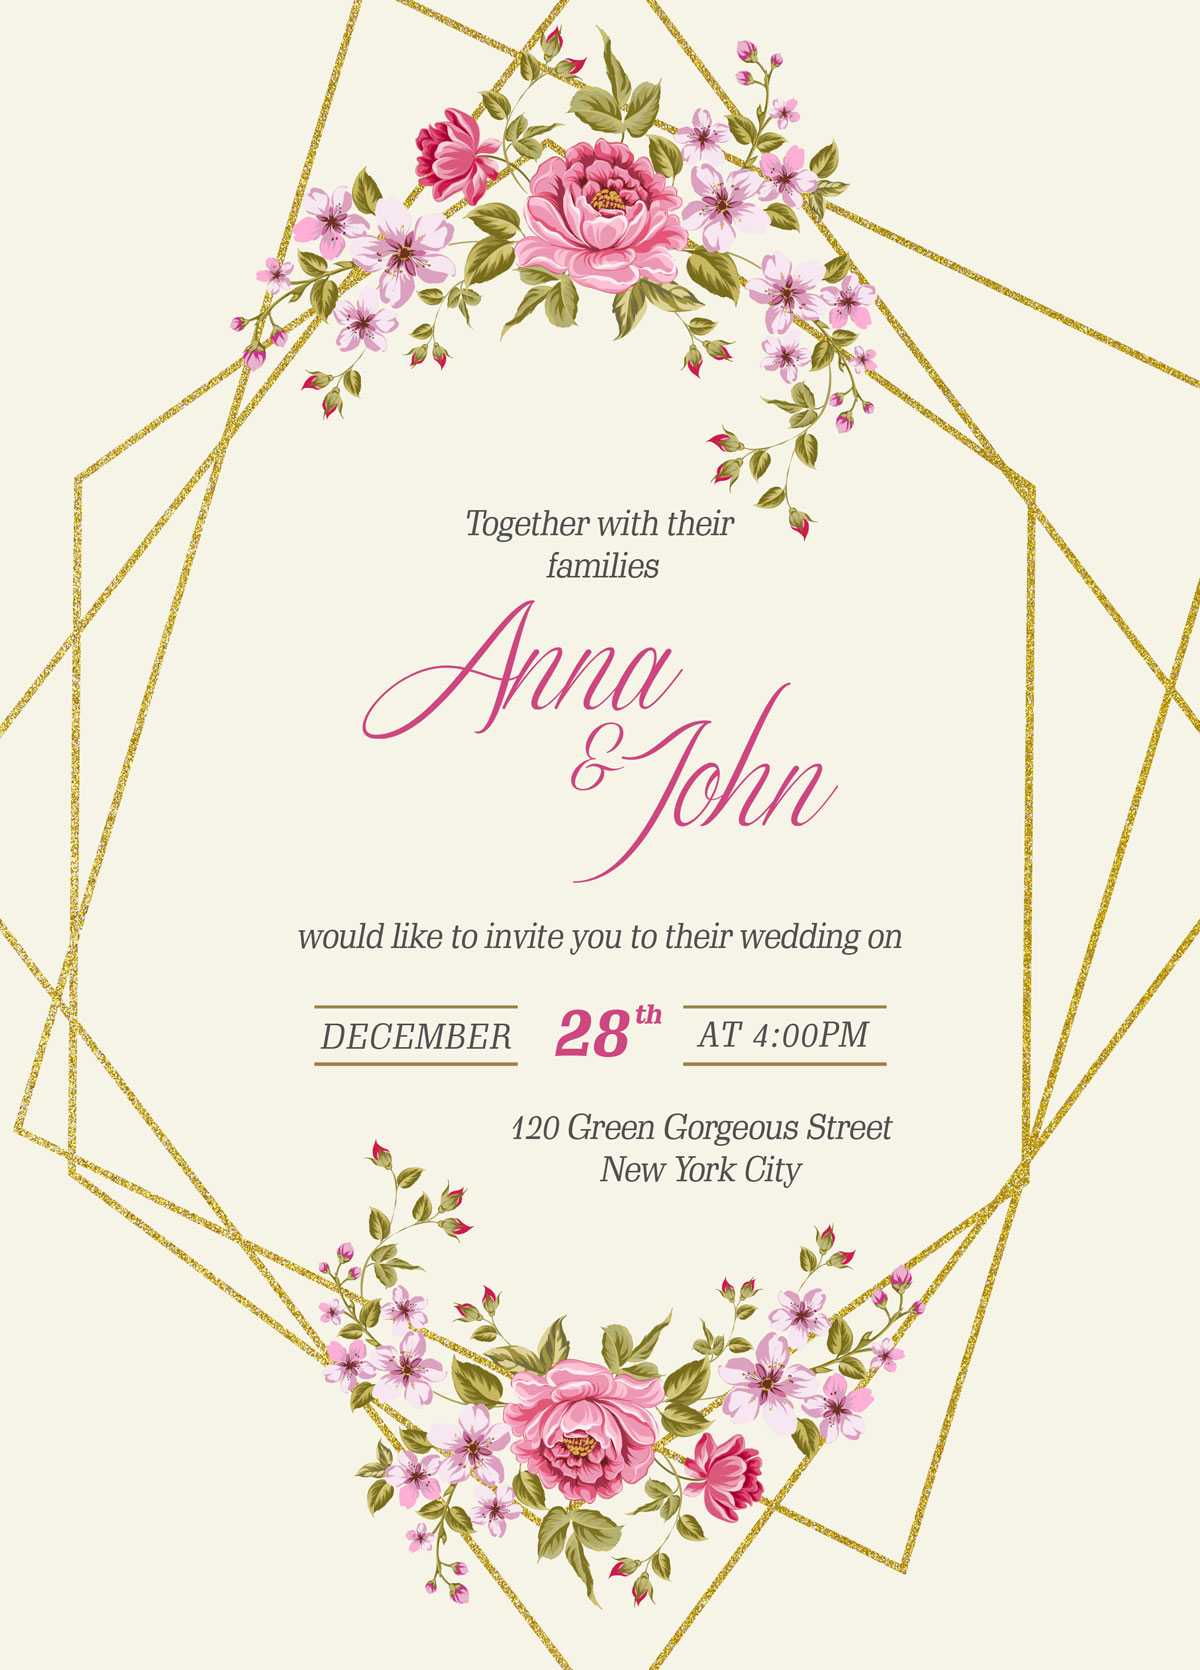 Free Wedding Invitation Card Template & Mockup Psd | Designbolts Pertaining To Invitation Cards Templates For Marriage